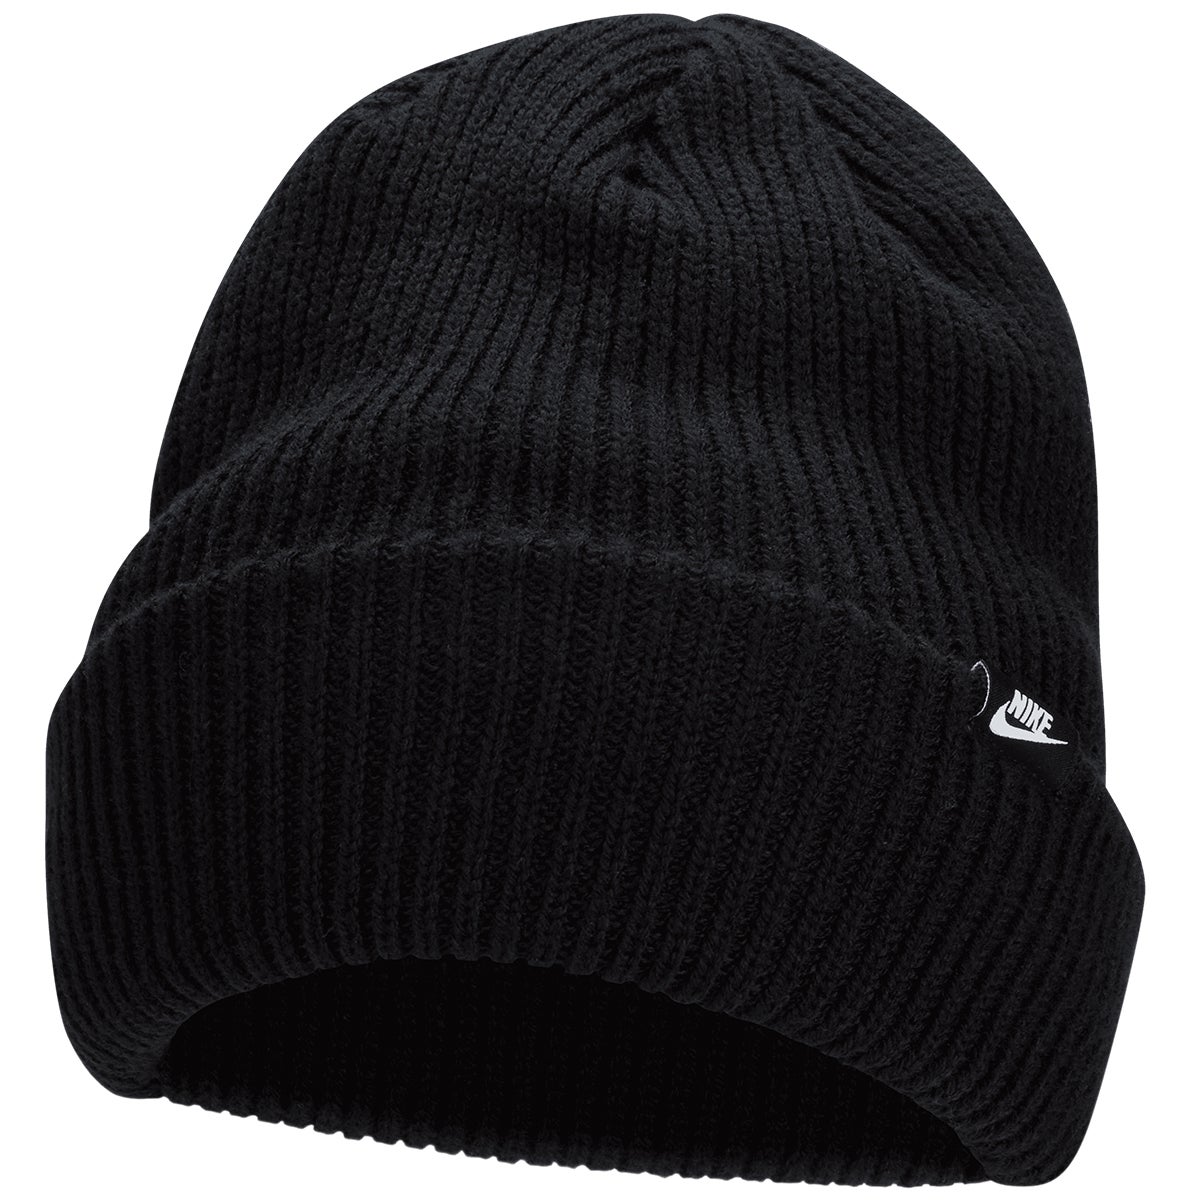 Snowboard Beanies | Boardertown - Free Freight / 90 Day Returns